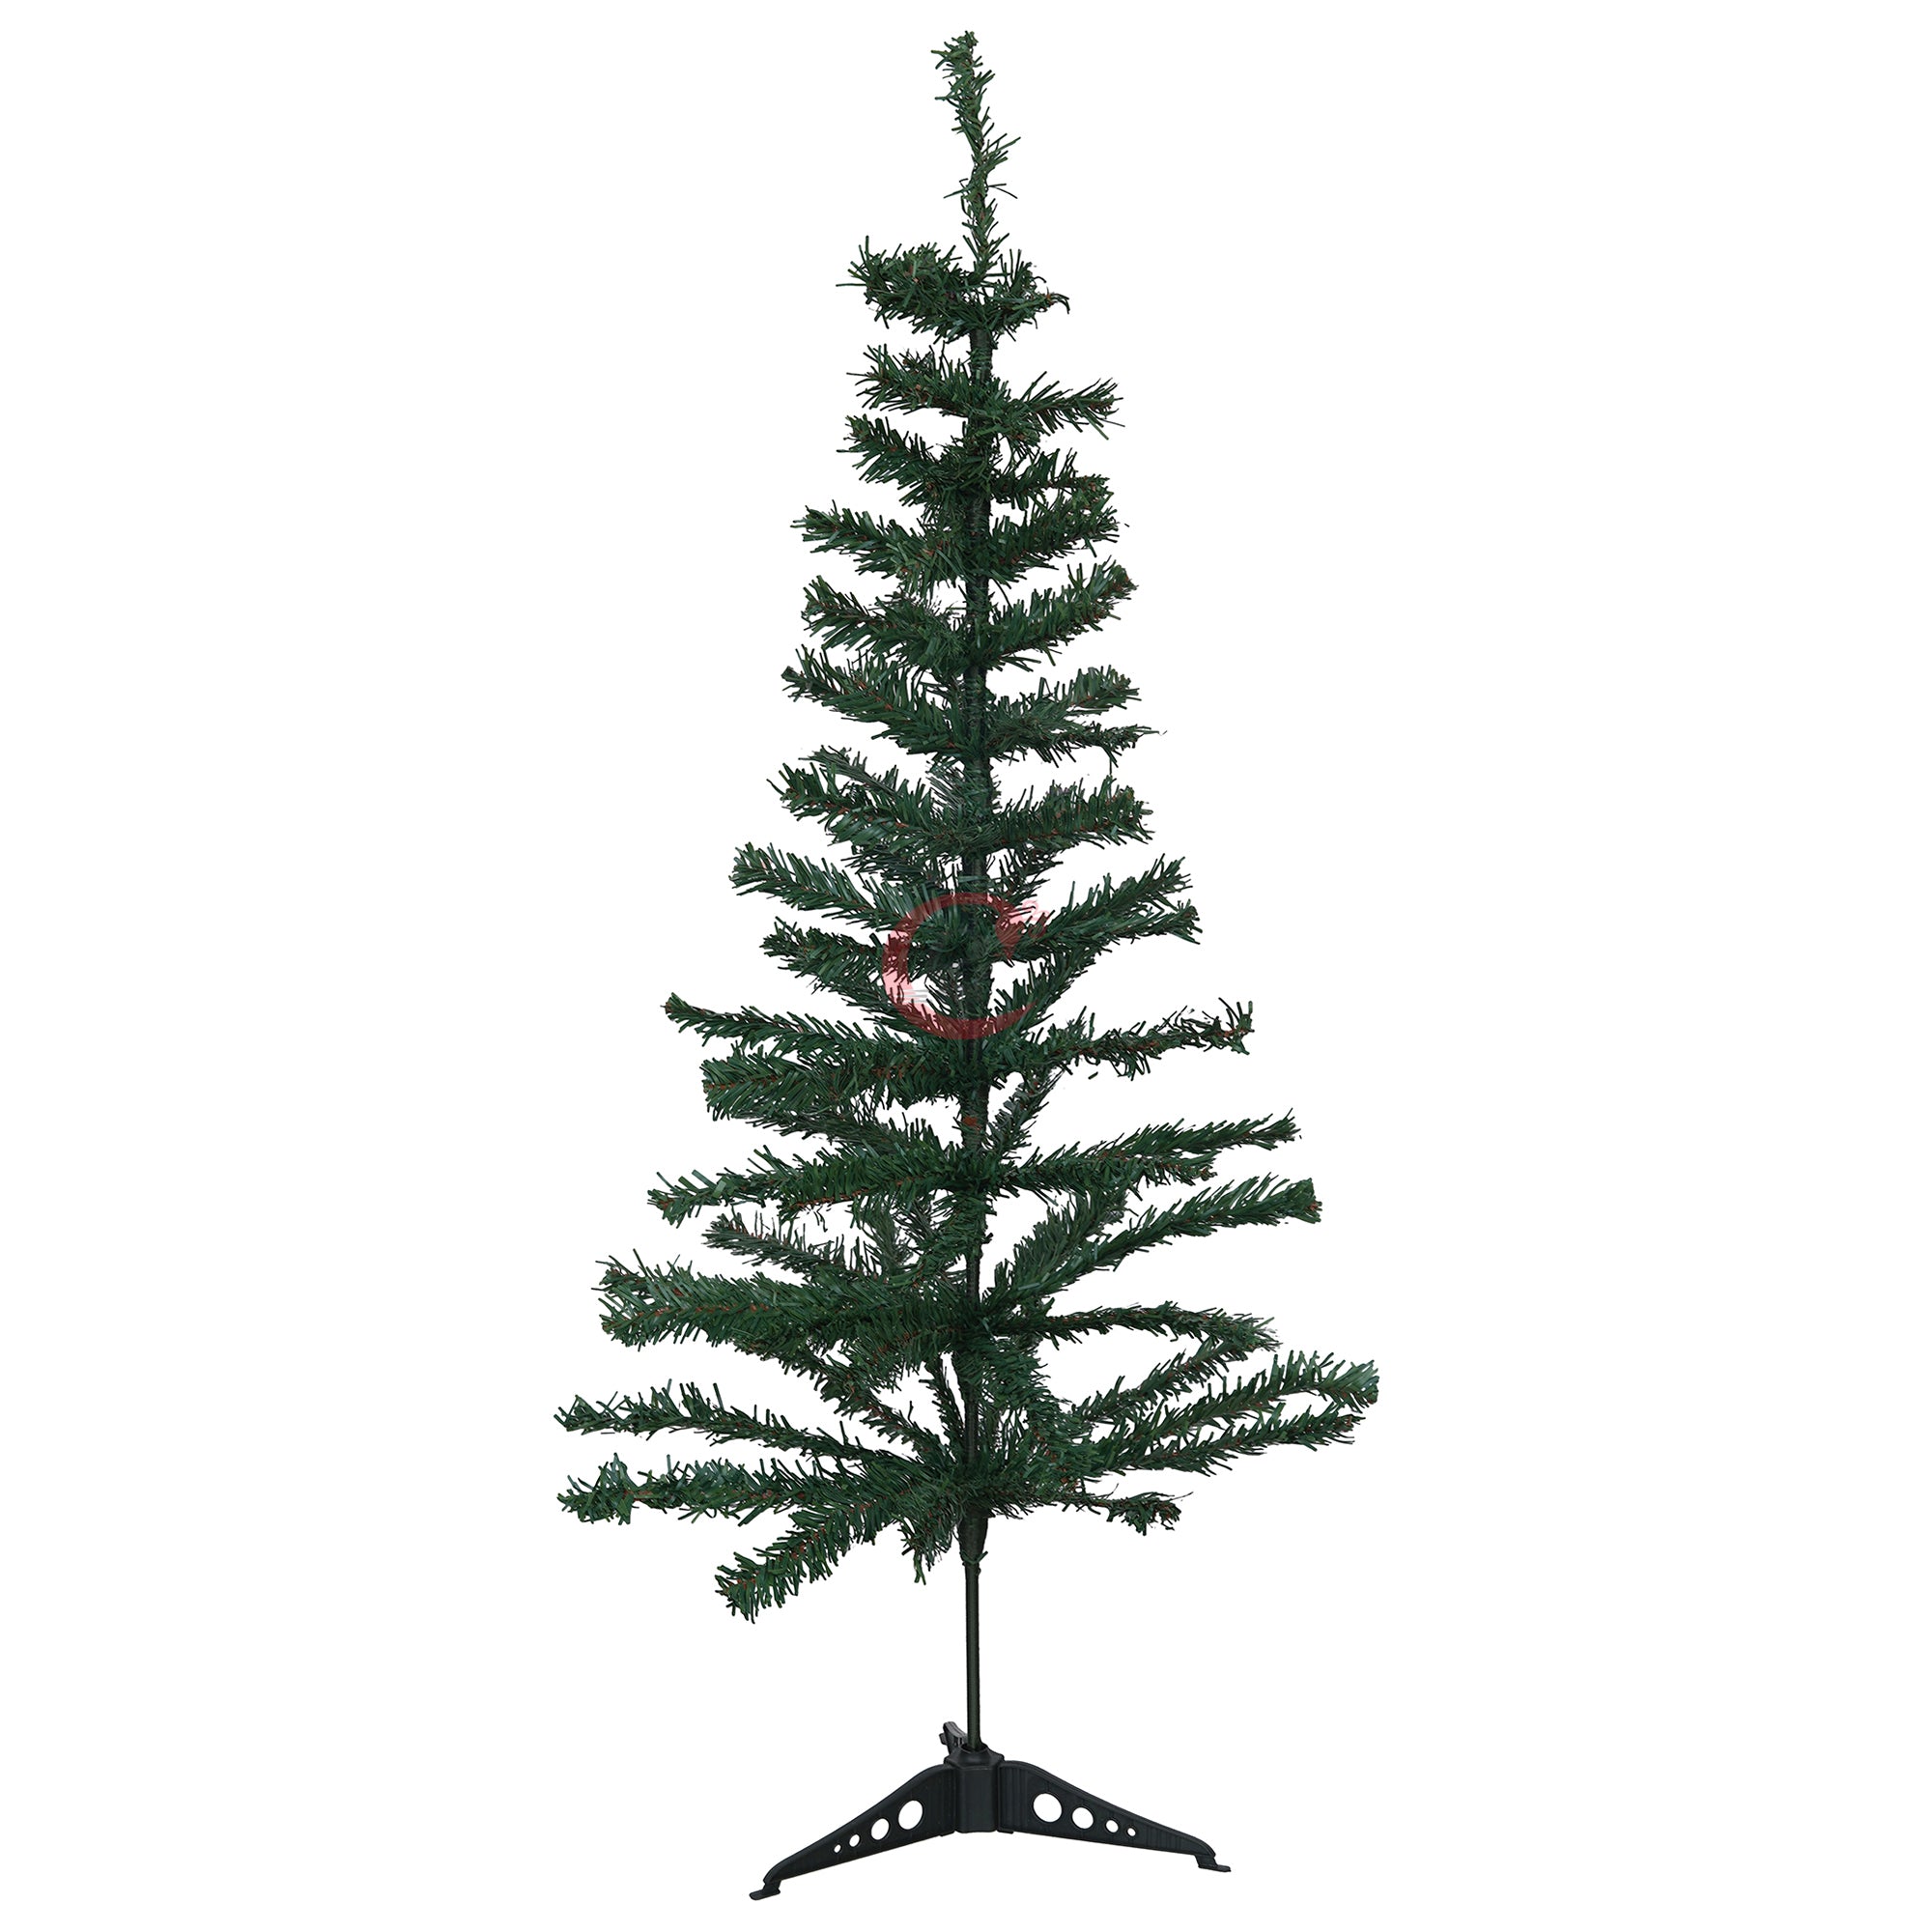 eCraftIndia 4 Feet Green Artificial Christmas Tree Xmas Pine Tree with Stand and 60 Christmas Decoration Ornaments Props - Merry Christmas Decoration Item for Home, Office, and Church 7